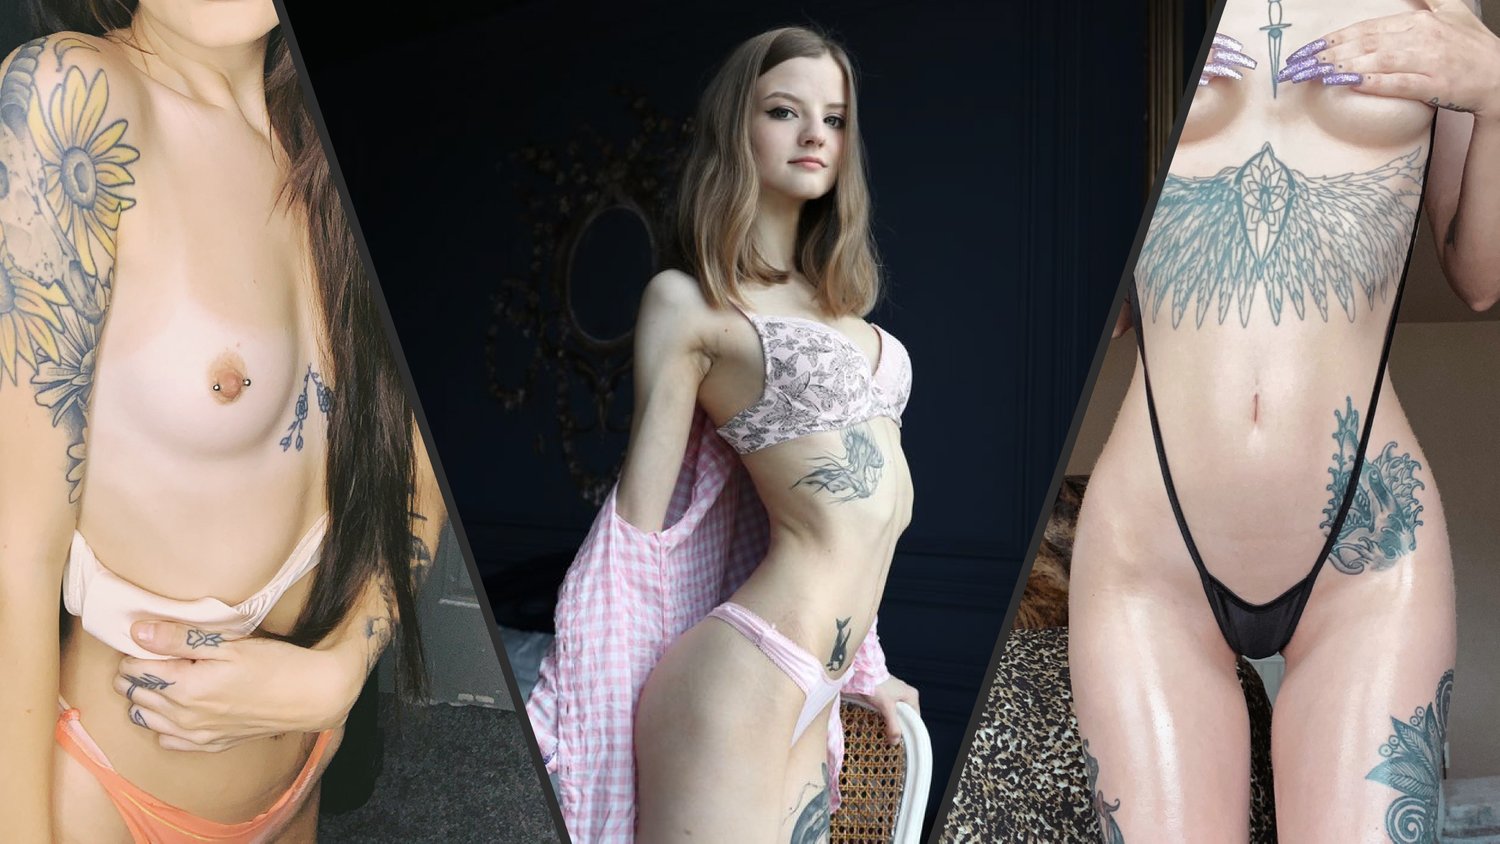 Composition of the hottest slim cam girls with tattoos featuring sloppydeep's skinny category banner